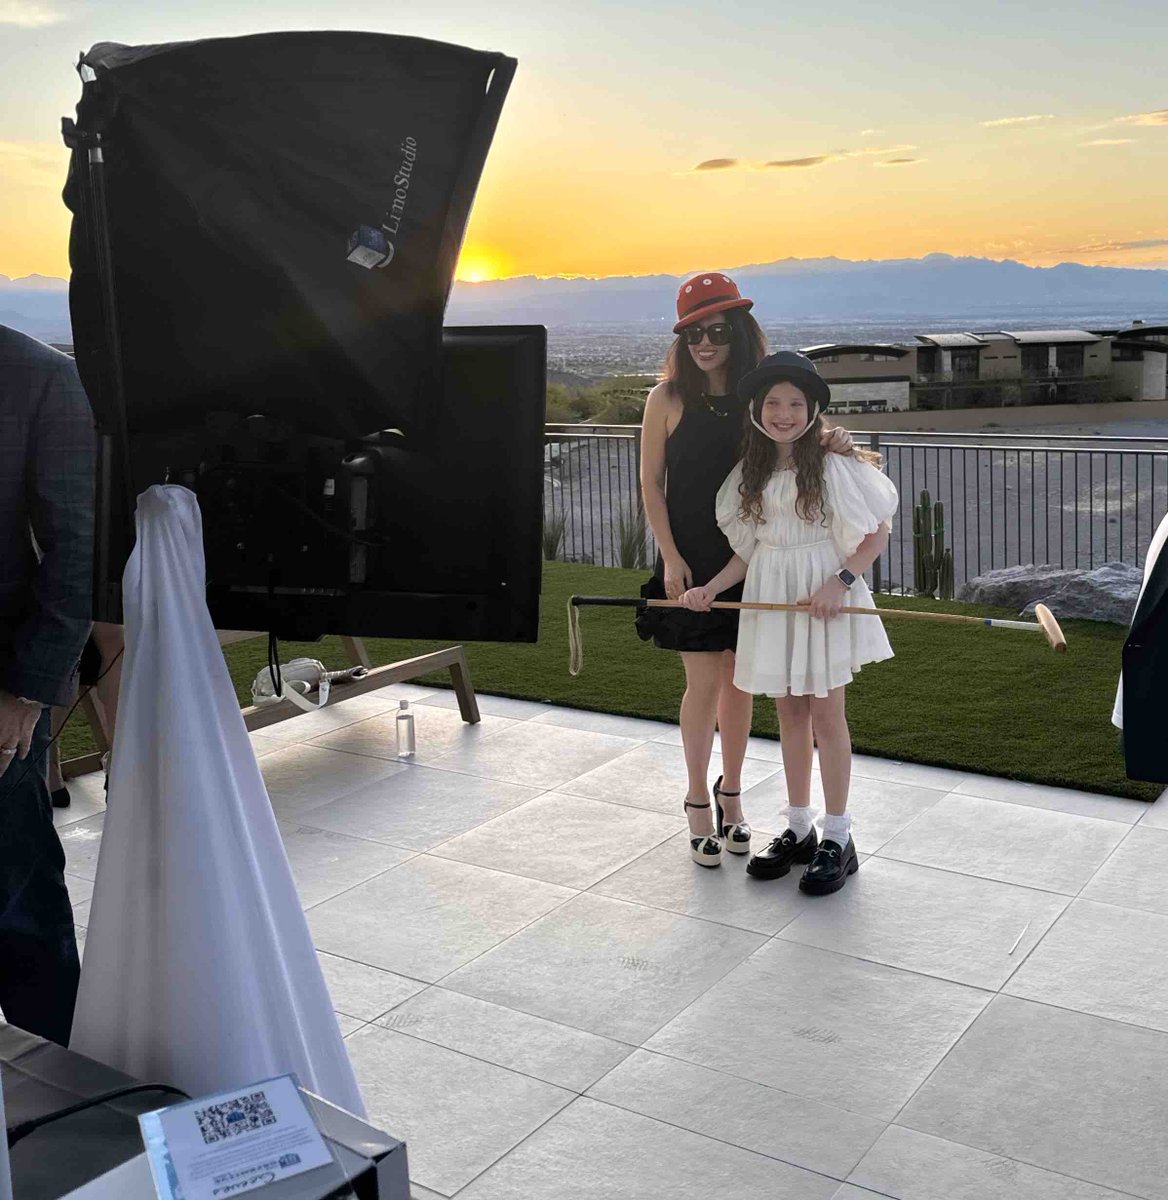 We were honored to be chosen by Dr. Stephen Stahl to partner with the STAHL Polo Team at the Lamborghini Polo Classic this past weekend. TDL hosted a Flip Book Photo Booth at the cocktail party the night before the match. 💙🏈